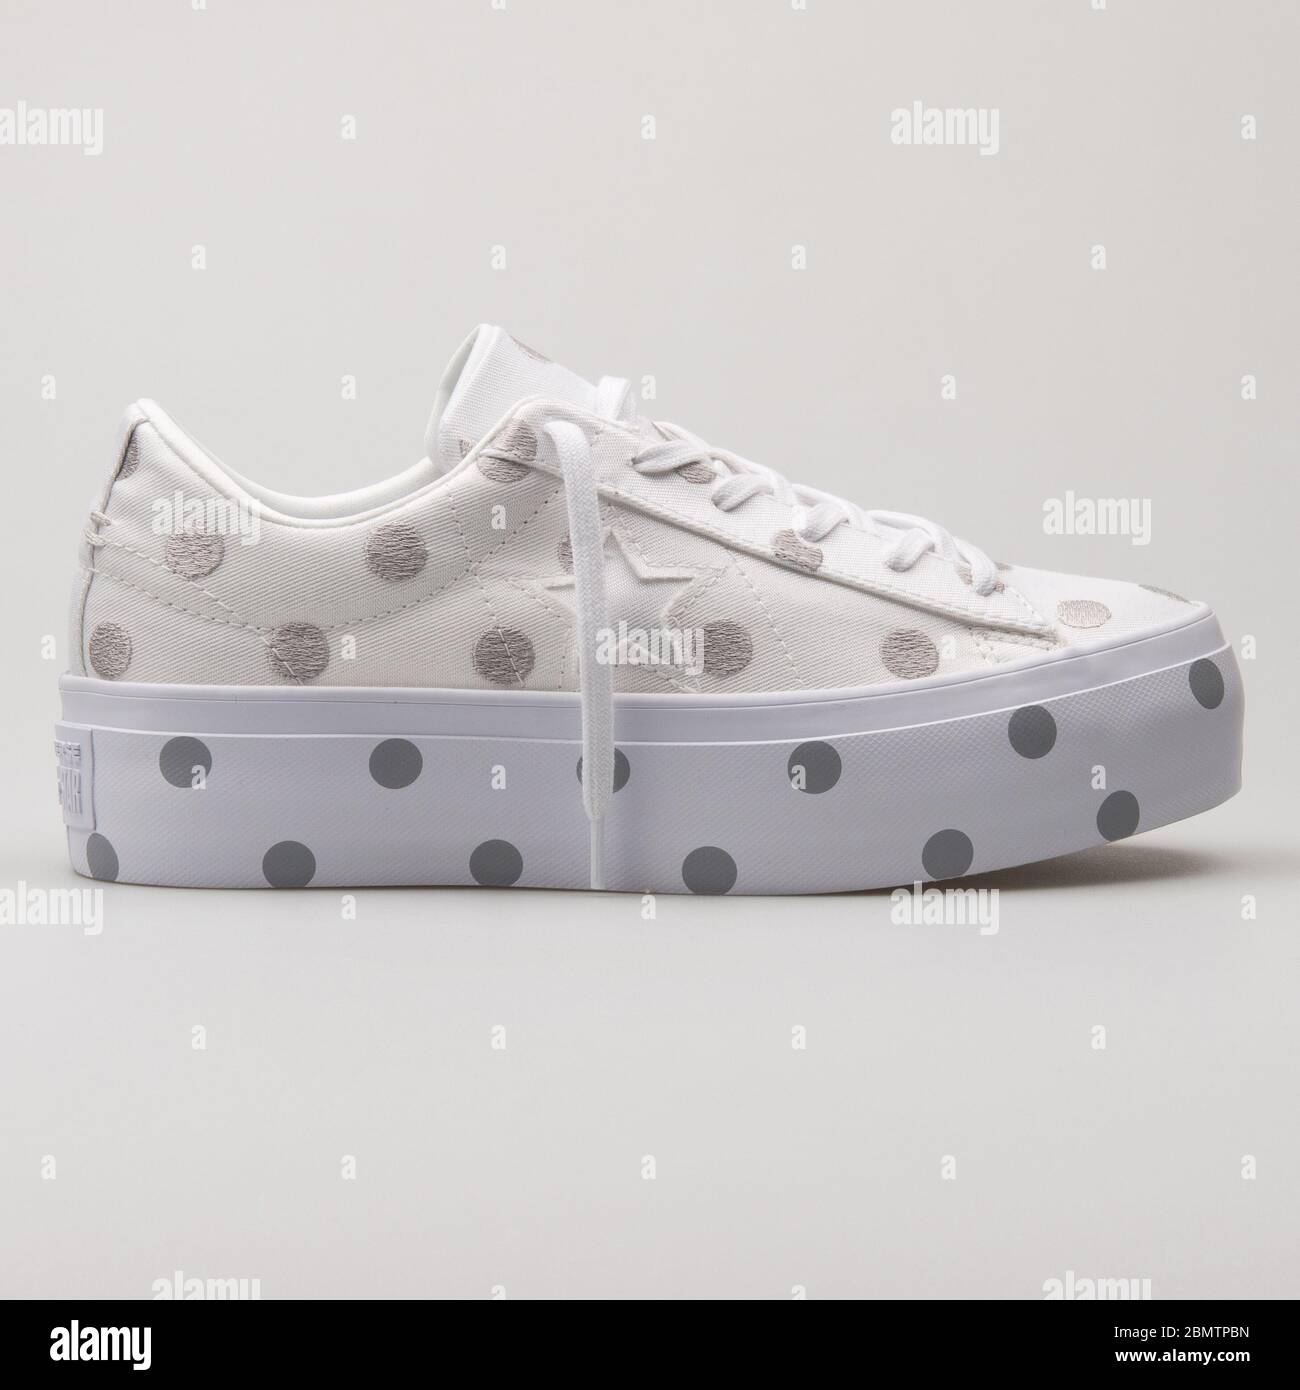 VIENNA, AUSTRIA - FEBRUARY 19, 2018: Converse Chuck Taylor All Star Platform OX white and grey sneaker on white background. Stock Photo